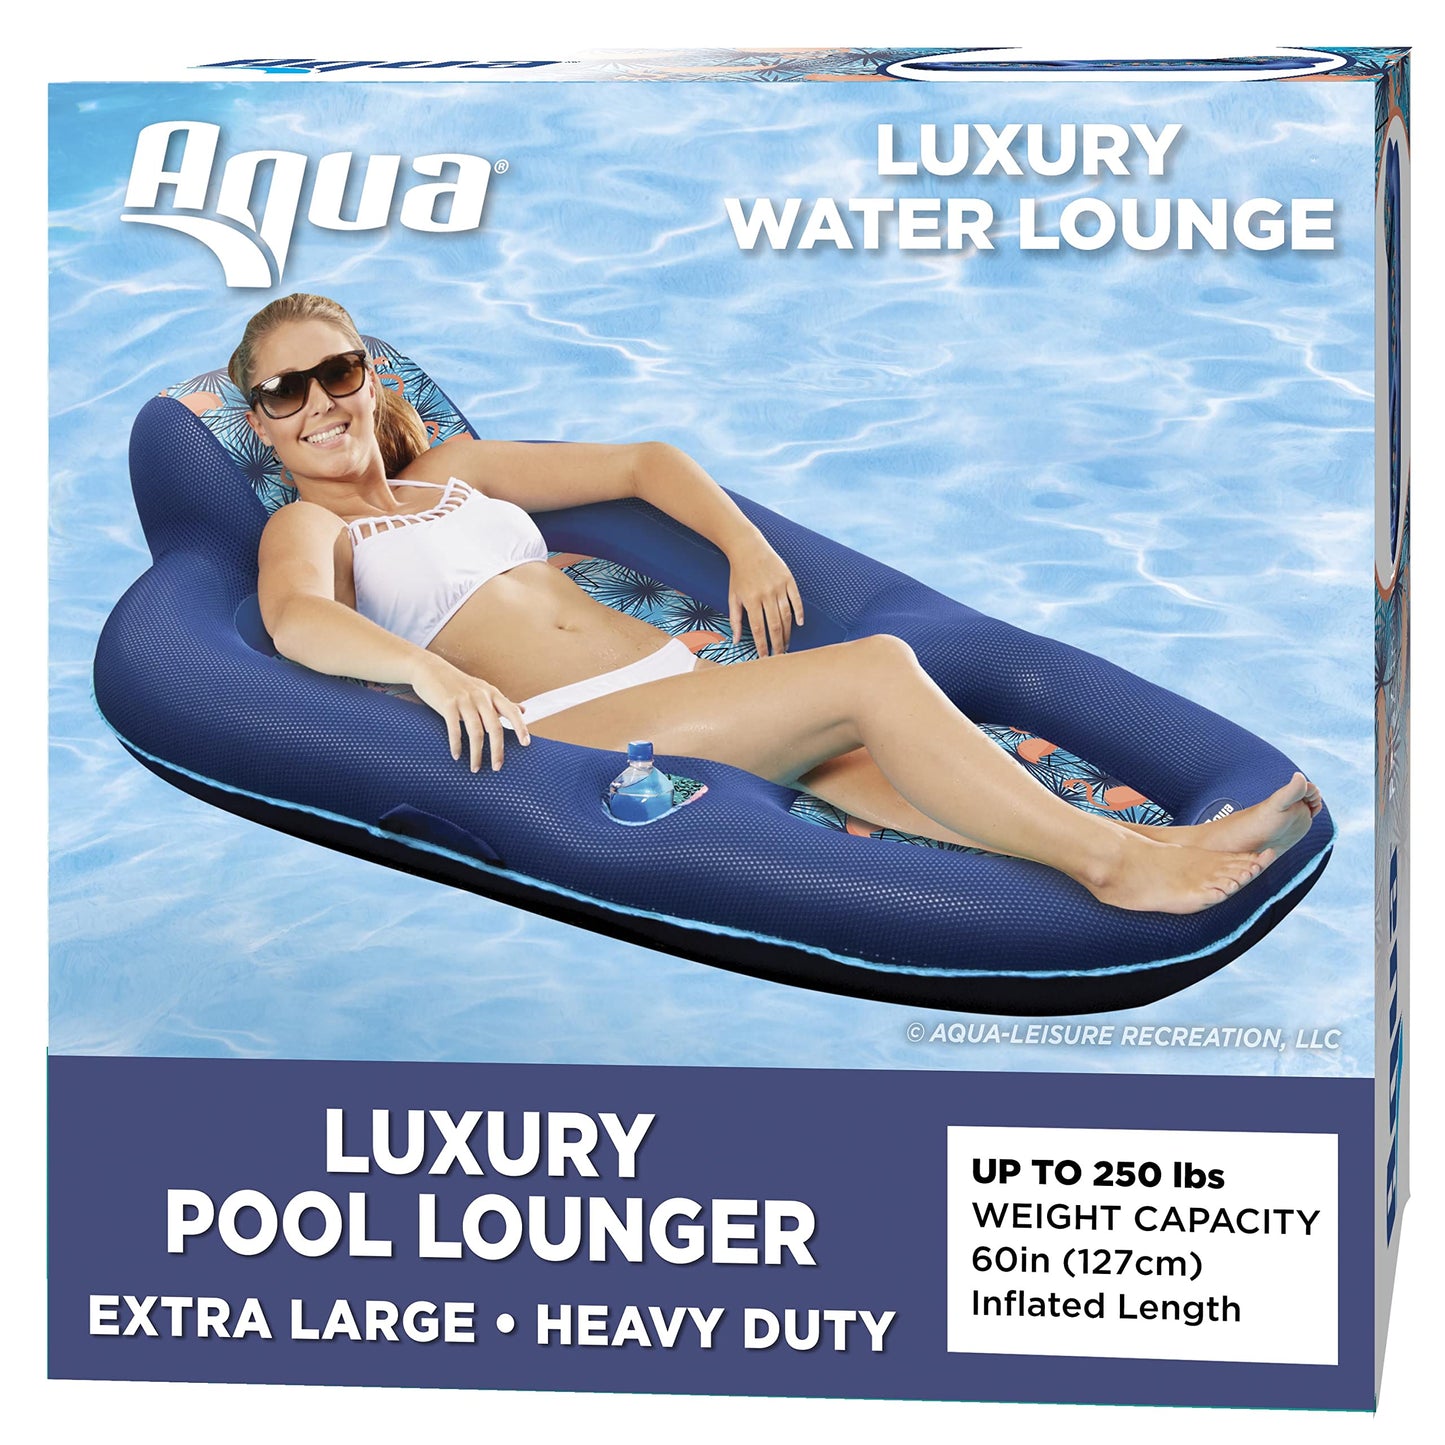 Aqua Luxury Pool Float Lounges, Recliners, Tanners – Multiple Colors/Styles – for Adults and Kids Floating XL Lounge Palm Beach Flamingo